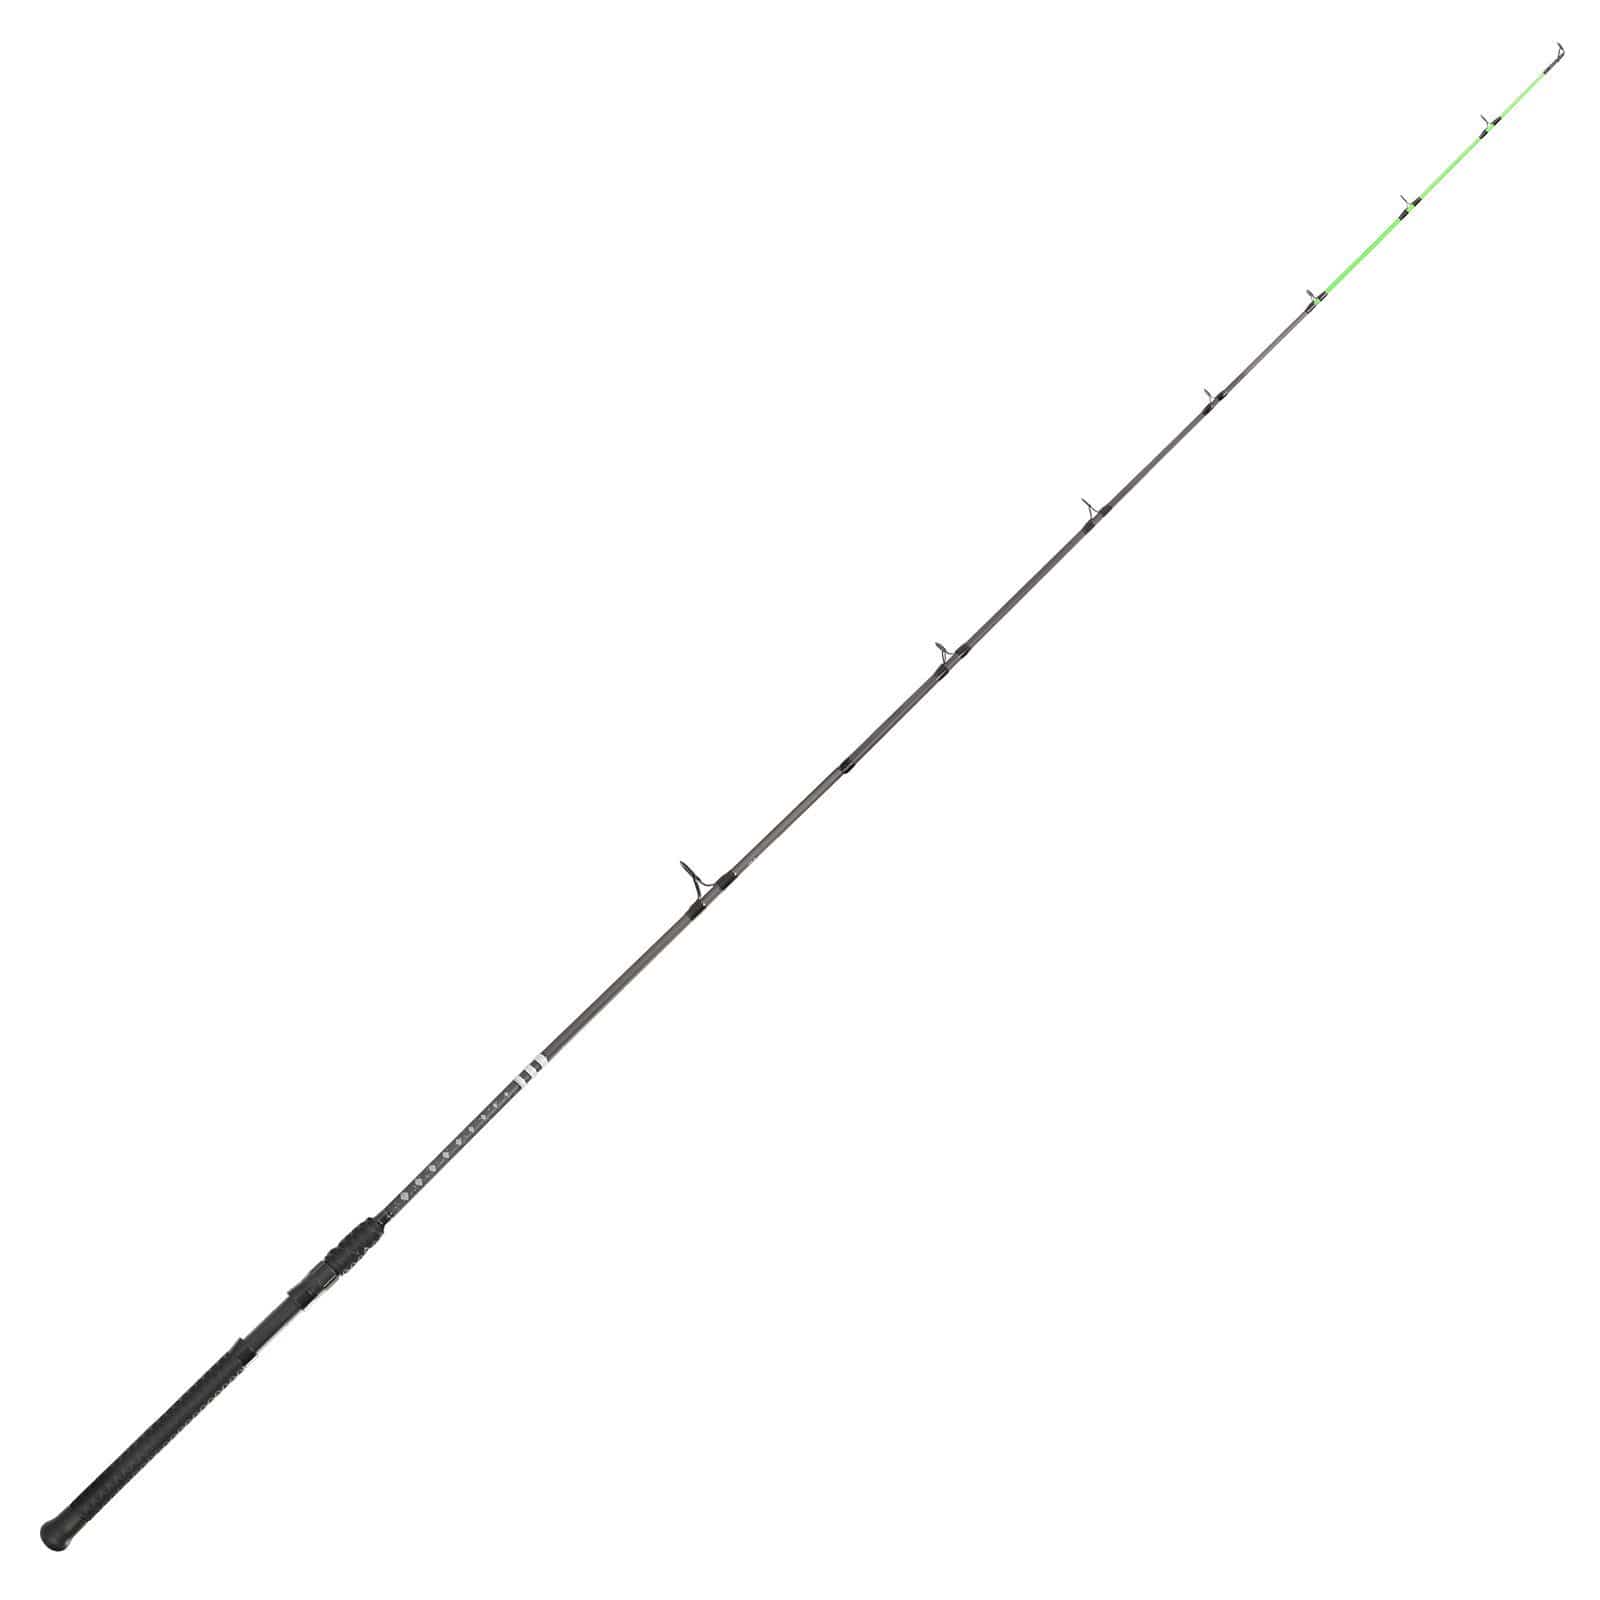 KastKing Casting Rods, High-Strength Components - Kong Fishing Rods